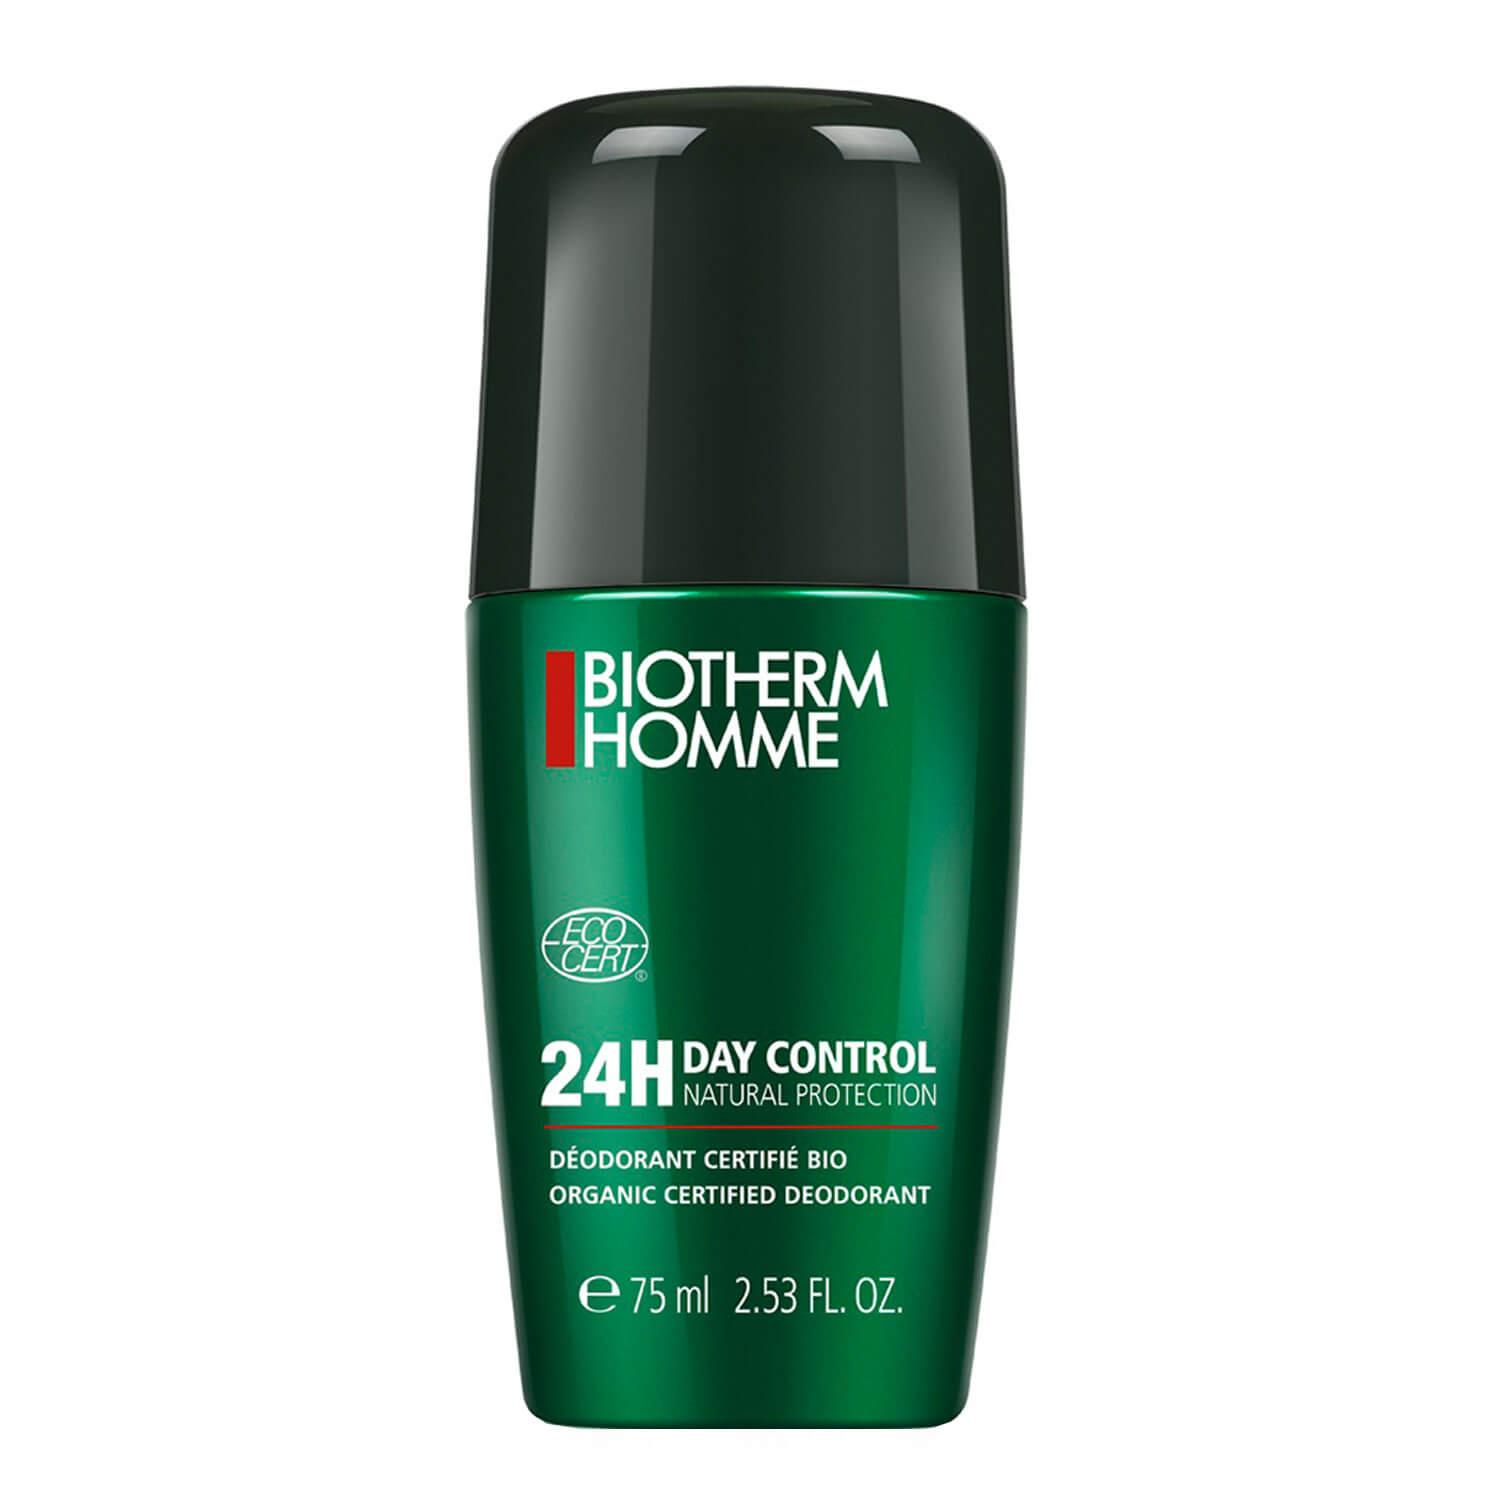 Biotherm Homme - Day Control 24H Natural Protection